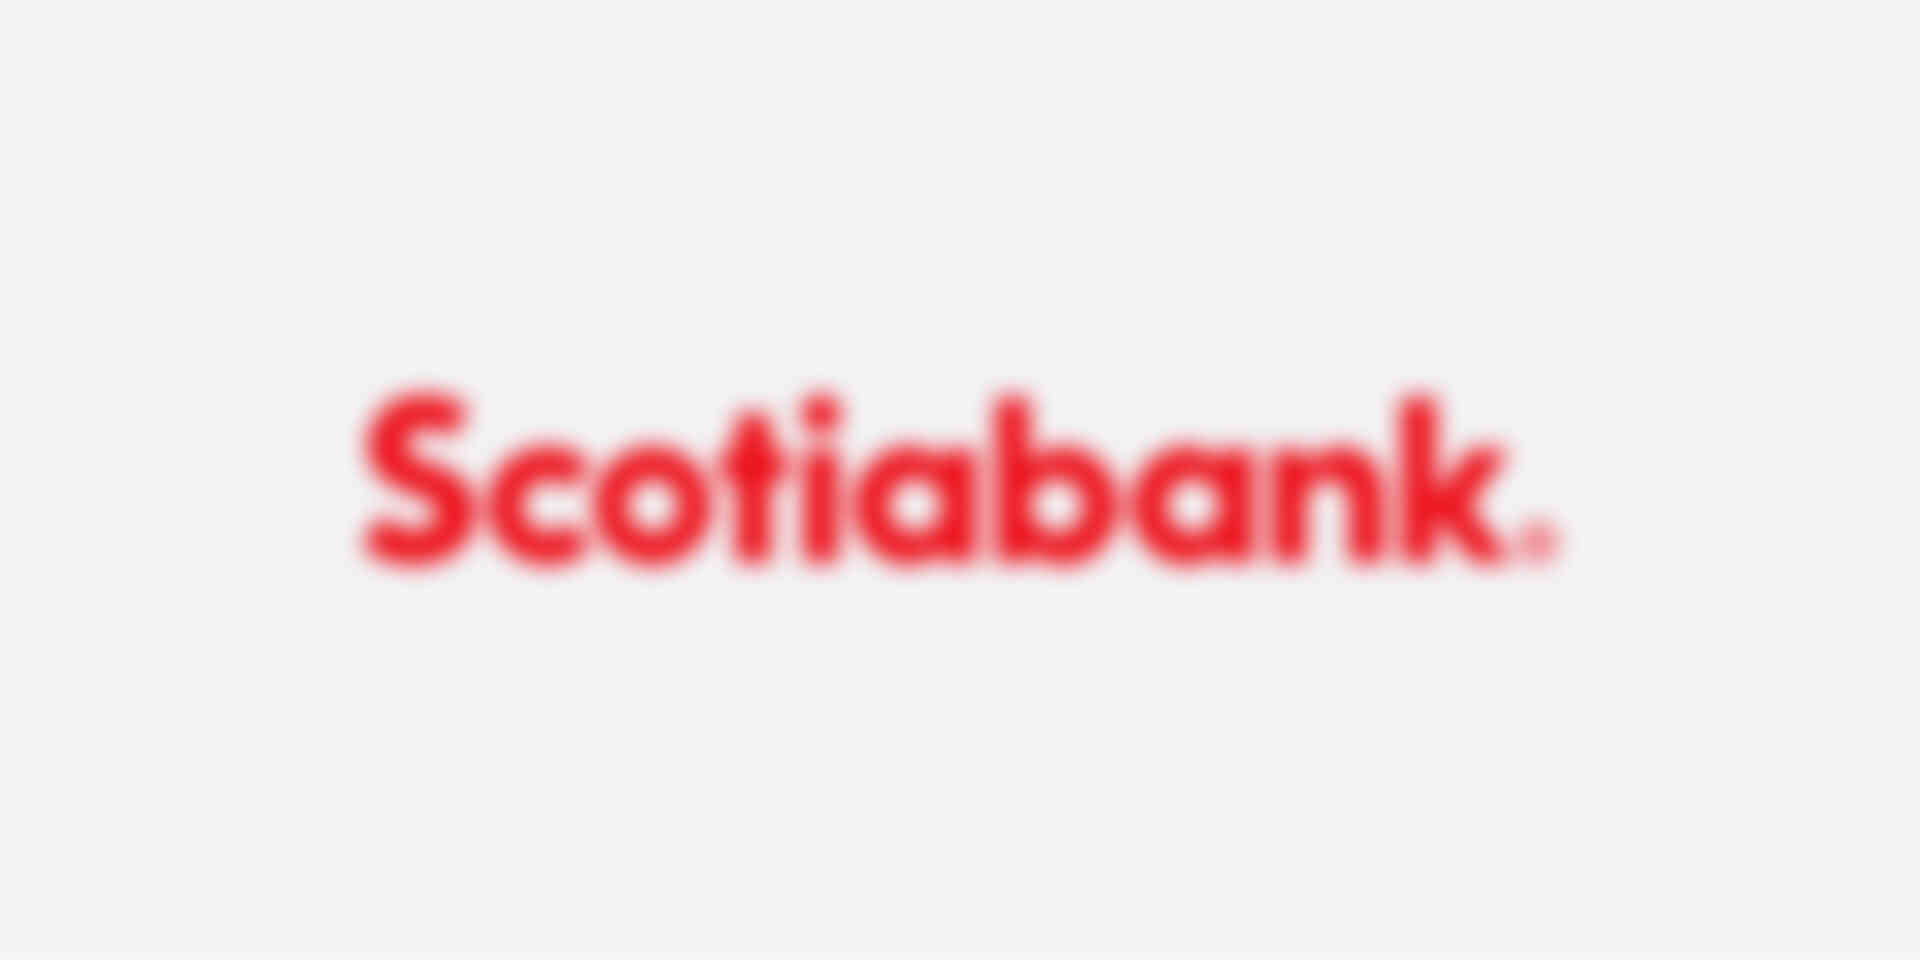 Our clients - financial-insurance-scotiabank